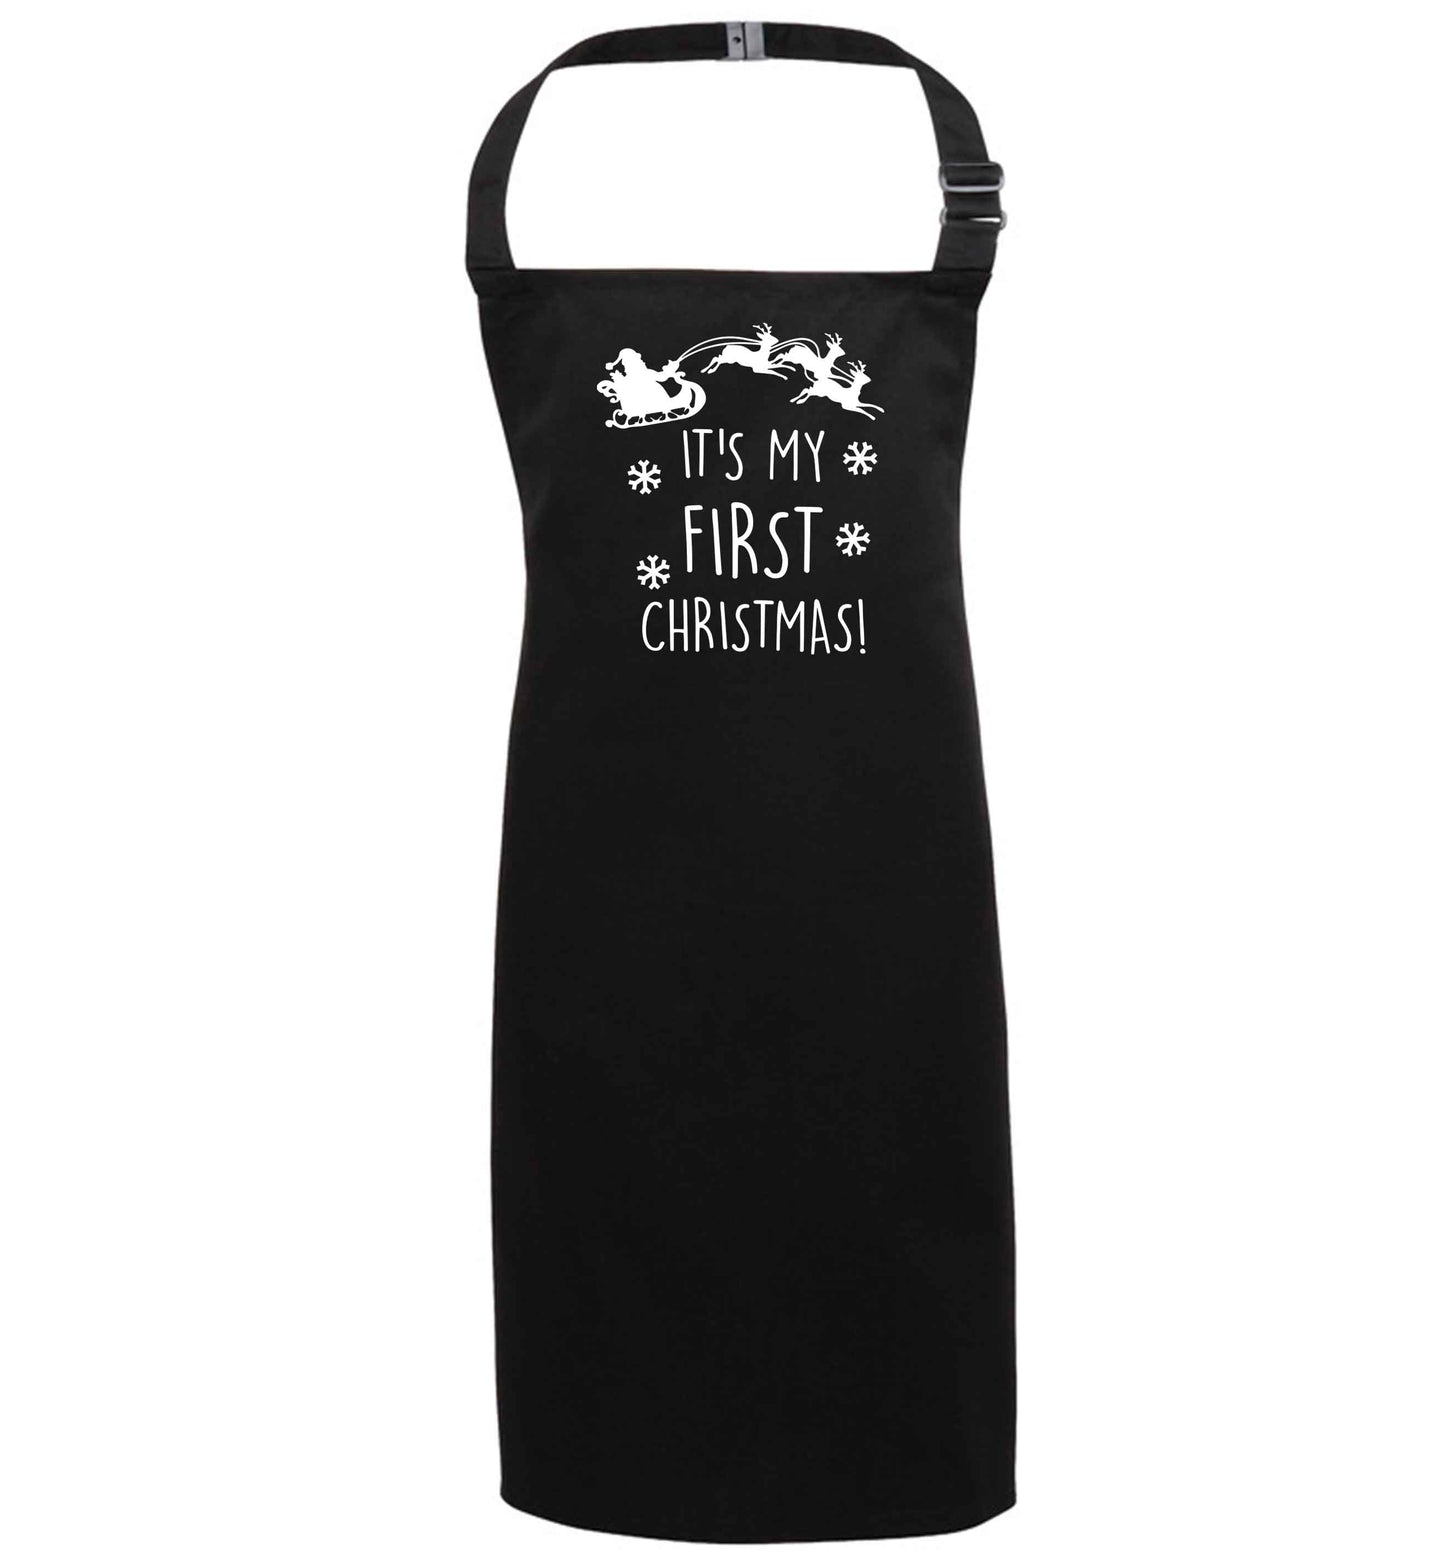 It's my first Christmas - Santa sleigh text black apron 7-10 years